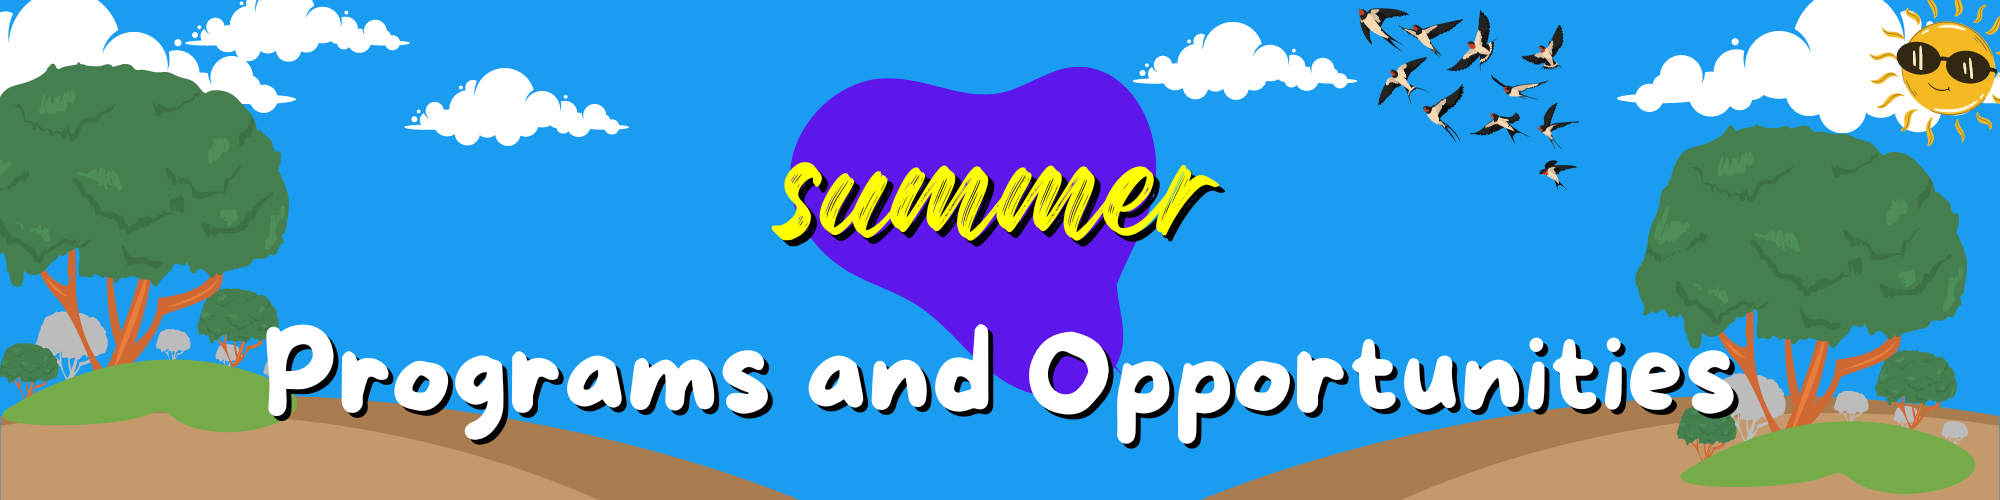 Summer programs and opportunites